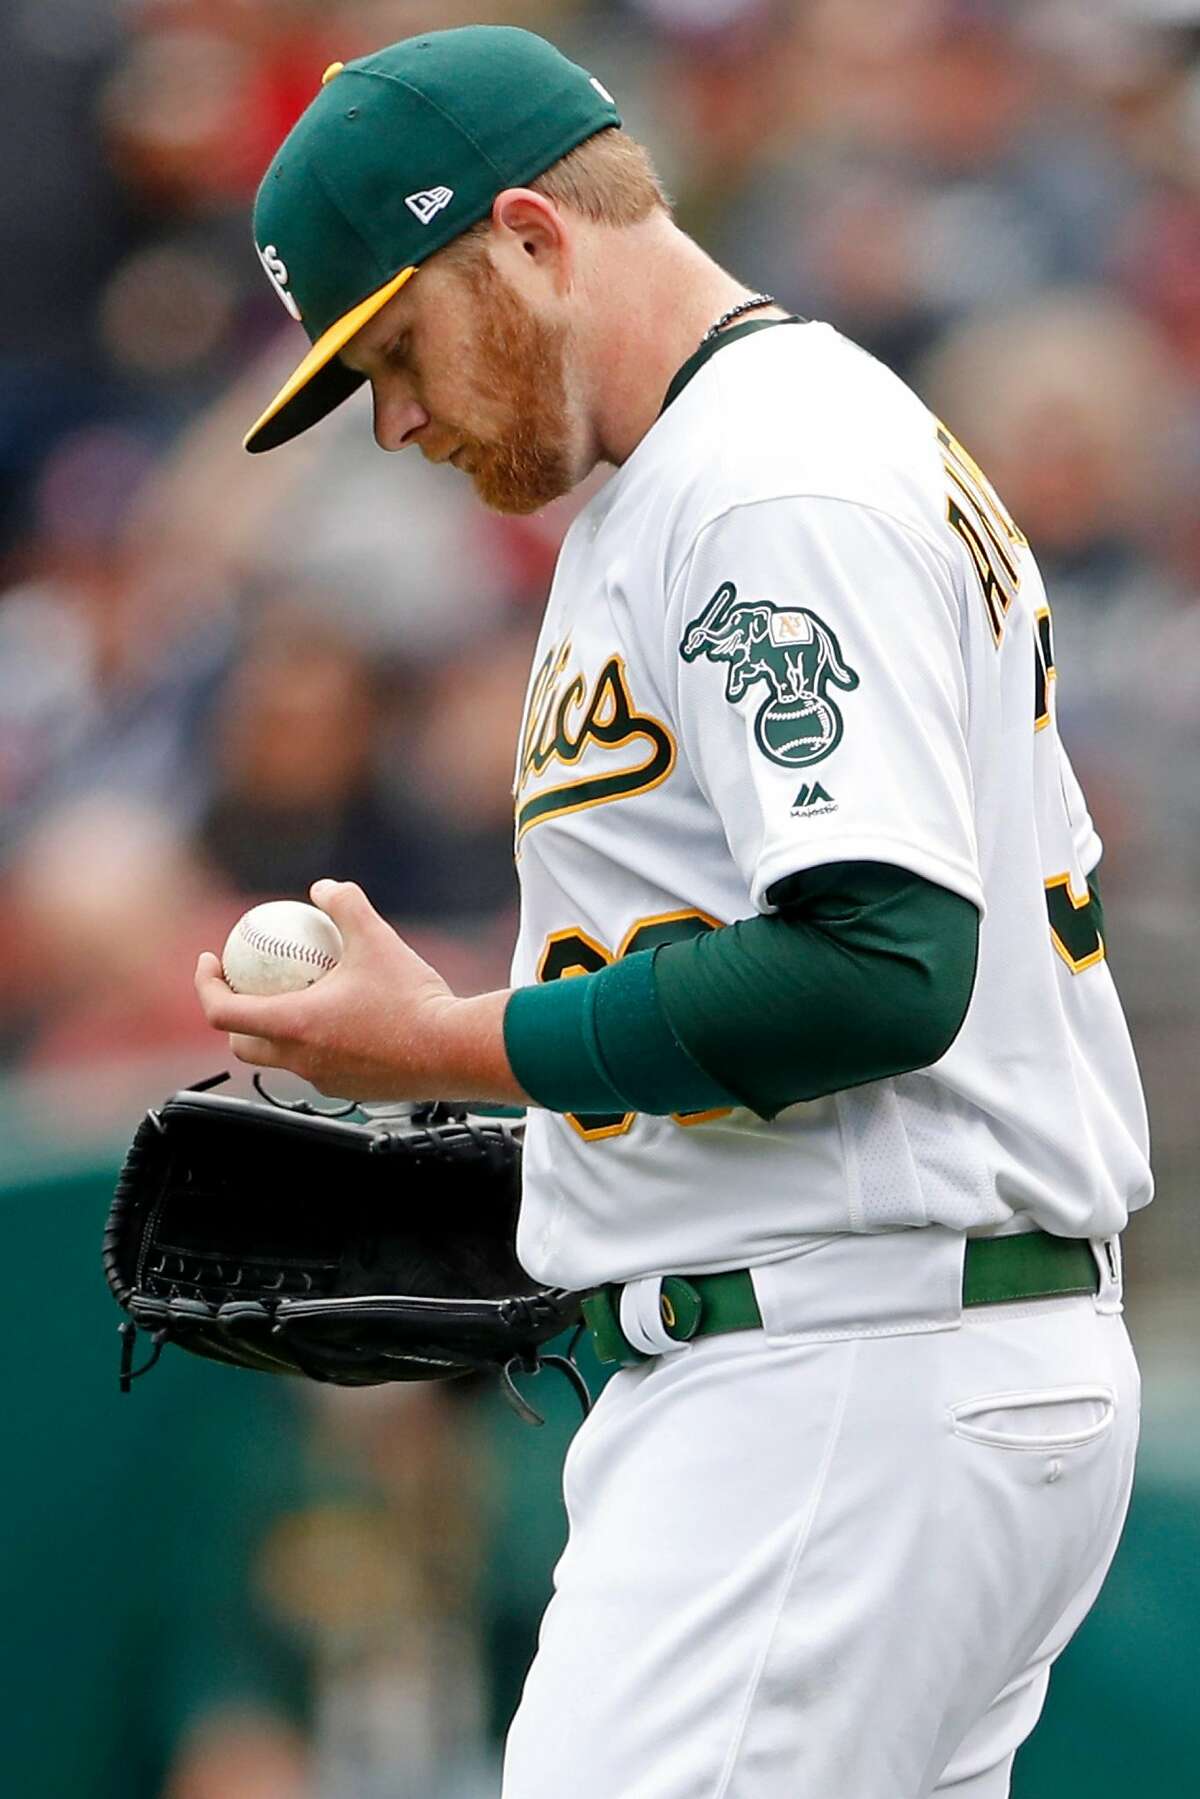 Oakland Athletics' starting pitcher Brett Anderson reacts to walking in a run in 1st inning against Boston Red Sox during MLB game at Oakland Coliseum in Oakland, Calif., on Thursday, April 4, 2019.